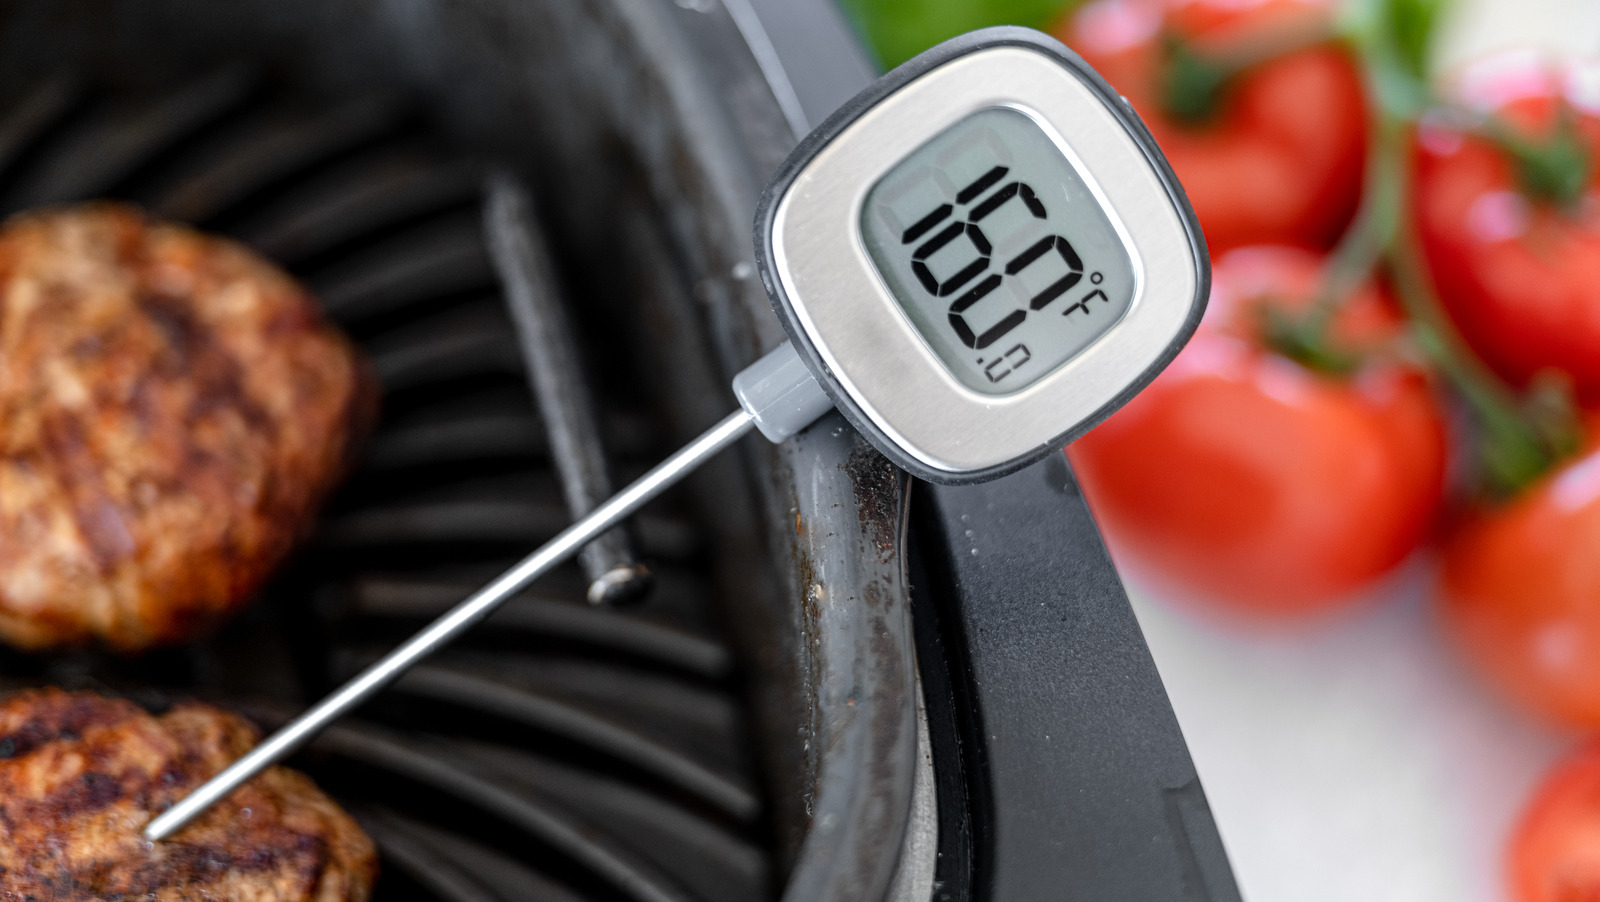 Keeping Hot Food Hot: Food Thermometer Use and Calibration for Food Safety